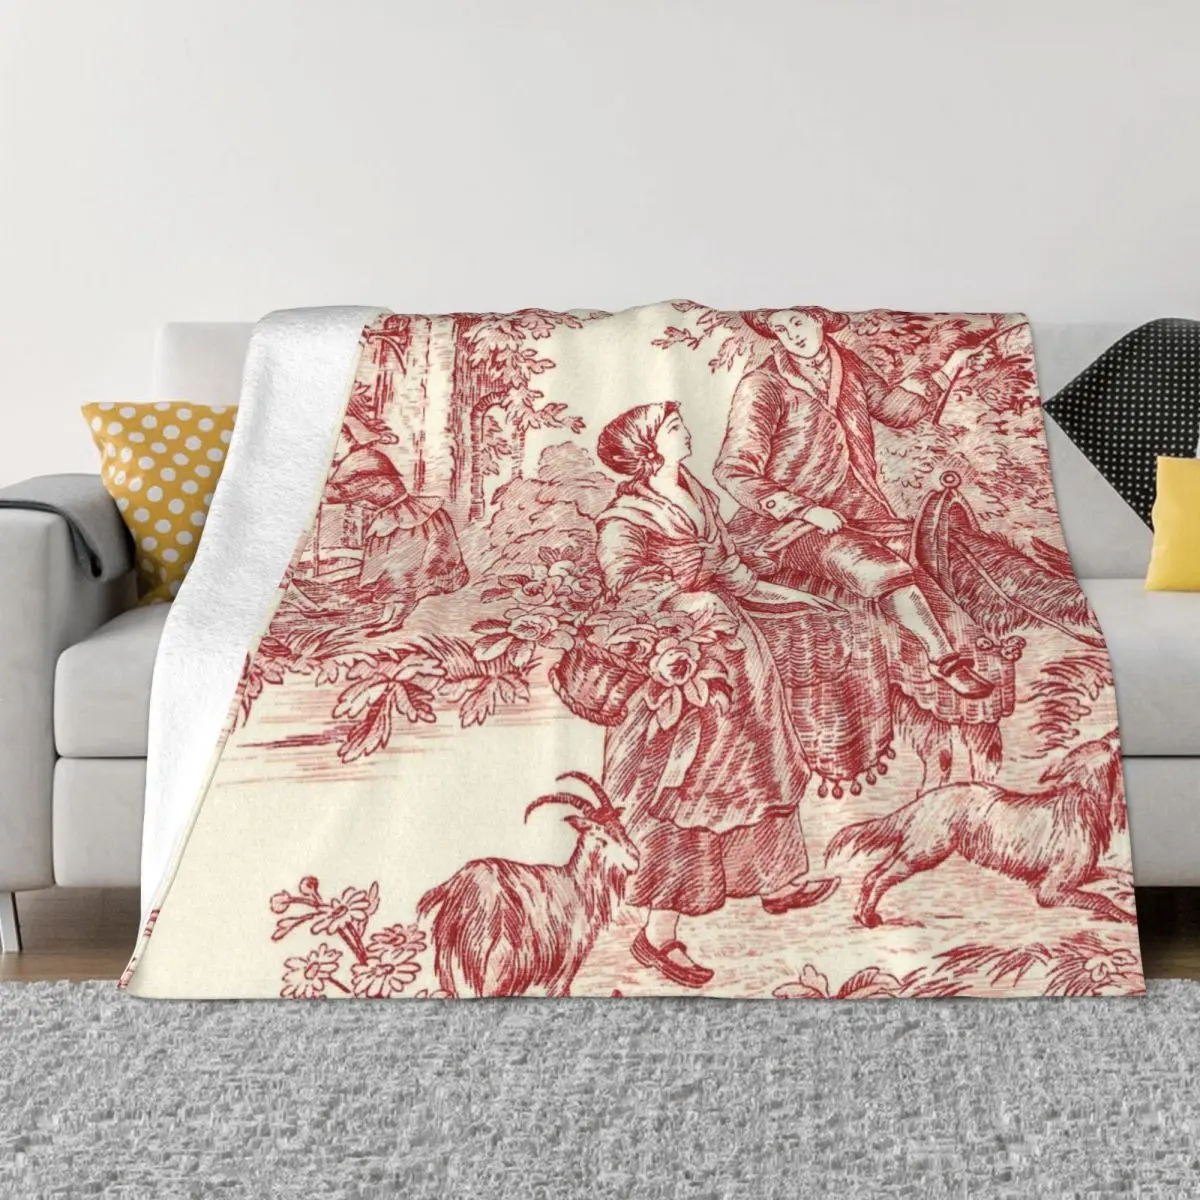 

French Country Toile De Jouy Blanket 3D Print Soft Flannel Fleece Warm Motifs Throw Blankets for Home Bedding Sofa Bedspreads